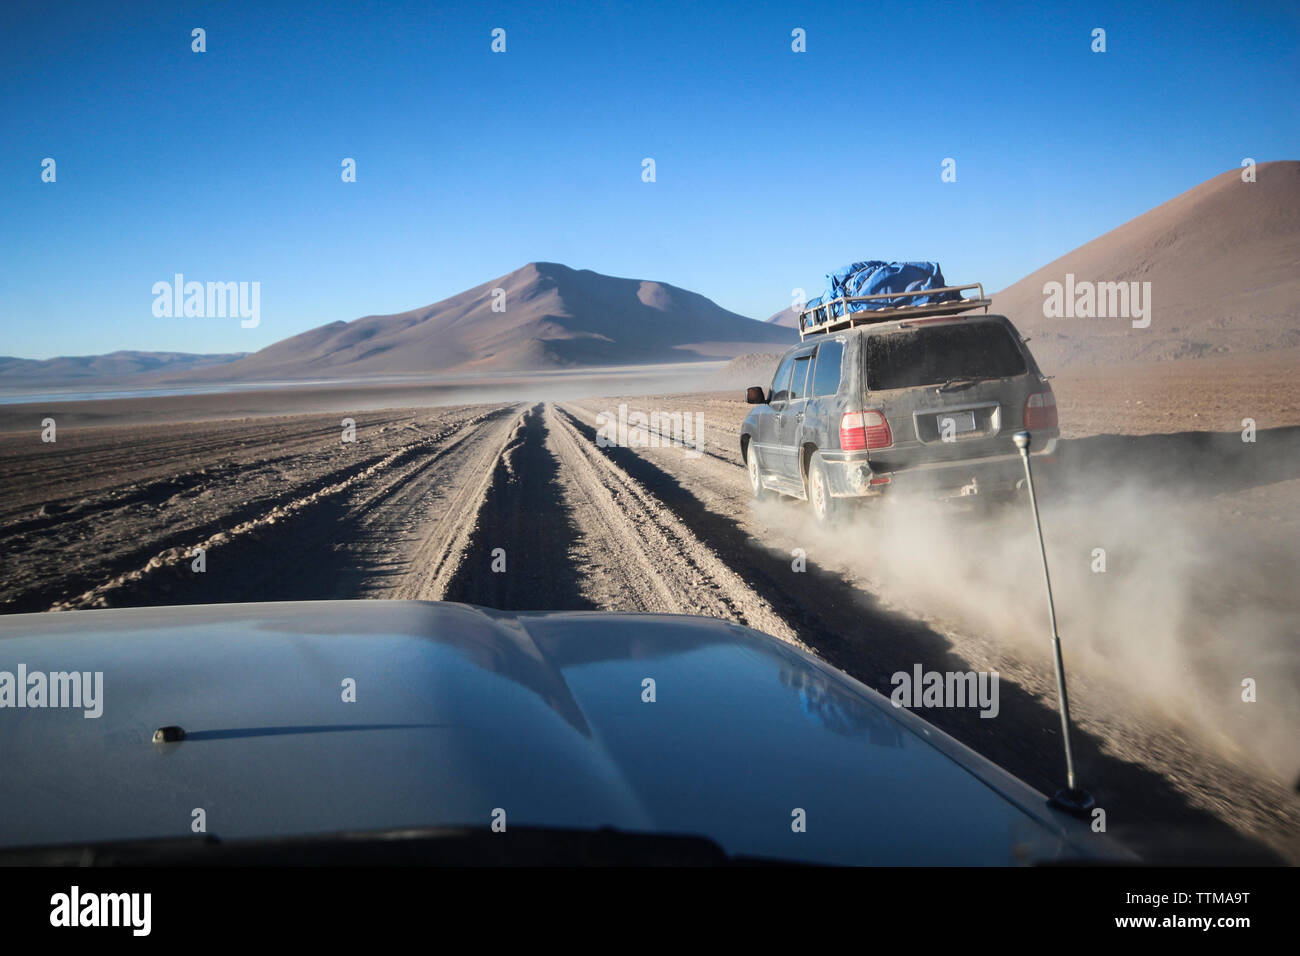 Off-road vehicles moving on dirt road against clear blue sky during sunny day Stock Photo